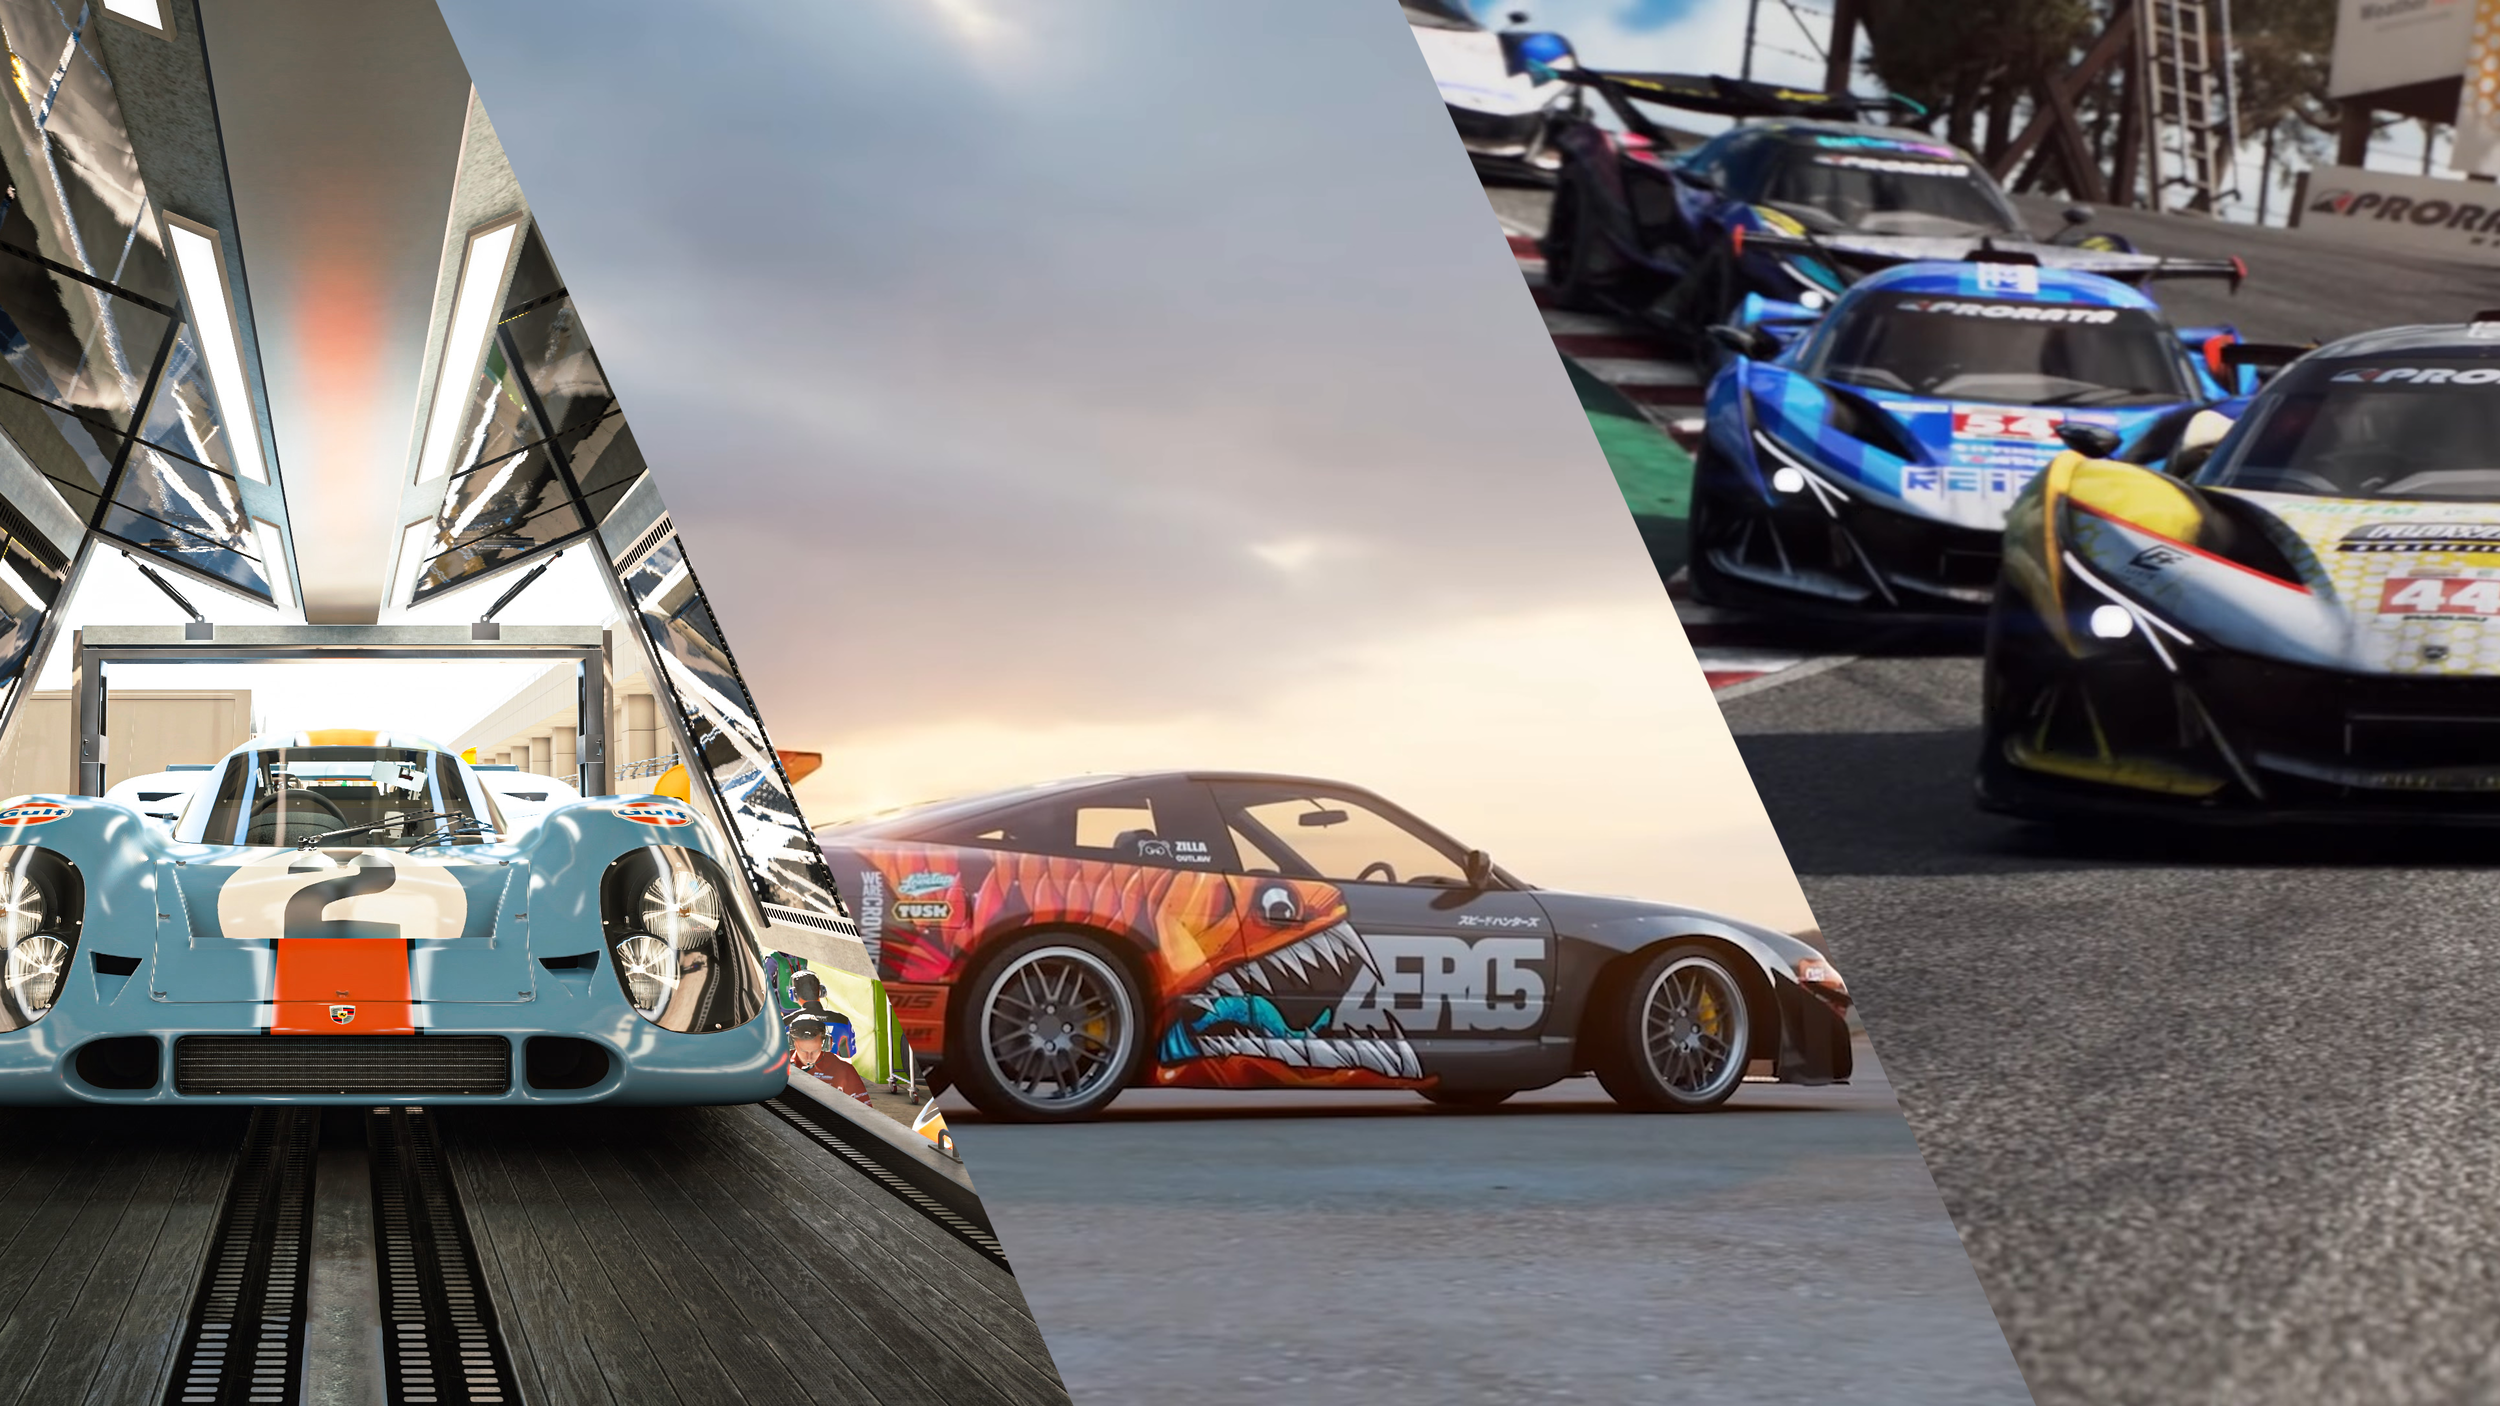 PlayStation ads suggest Horizon 2 is still on track for 'late 2021